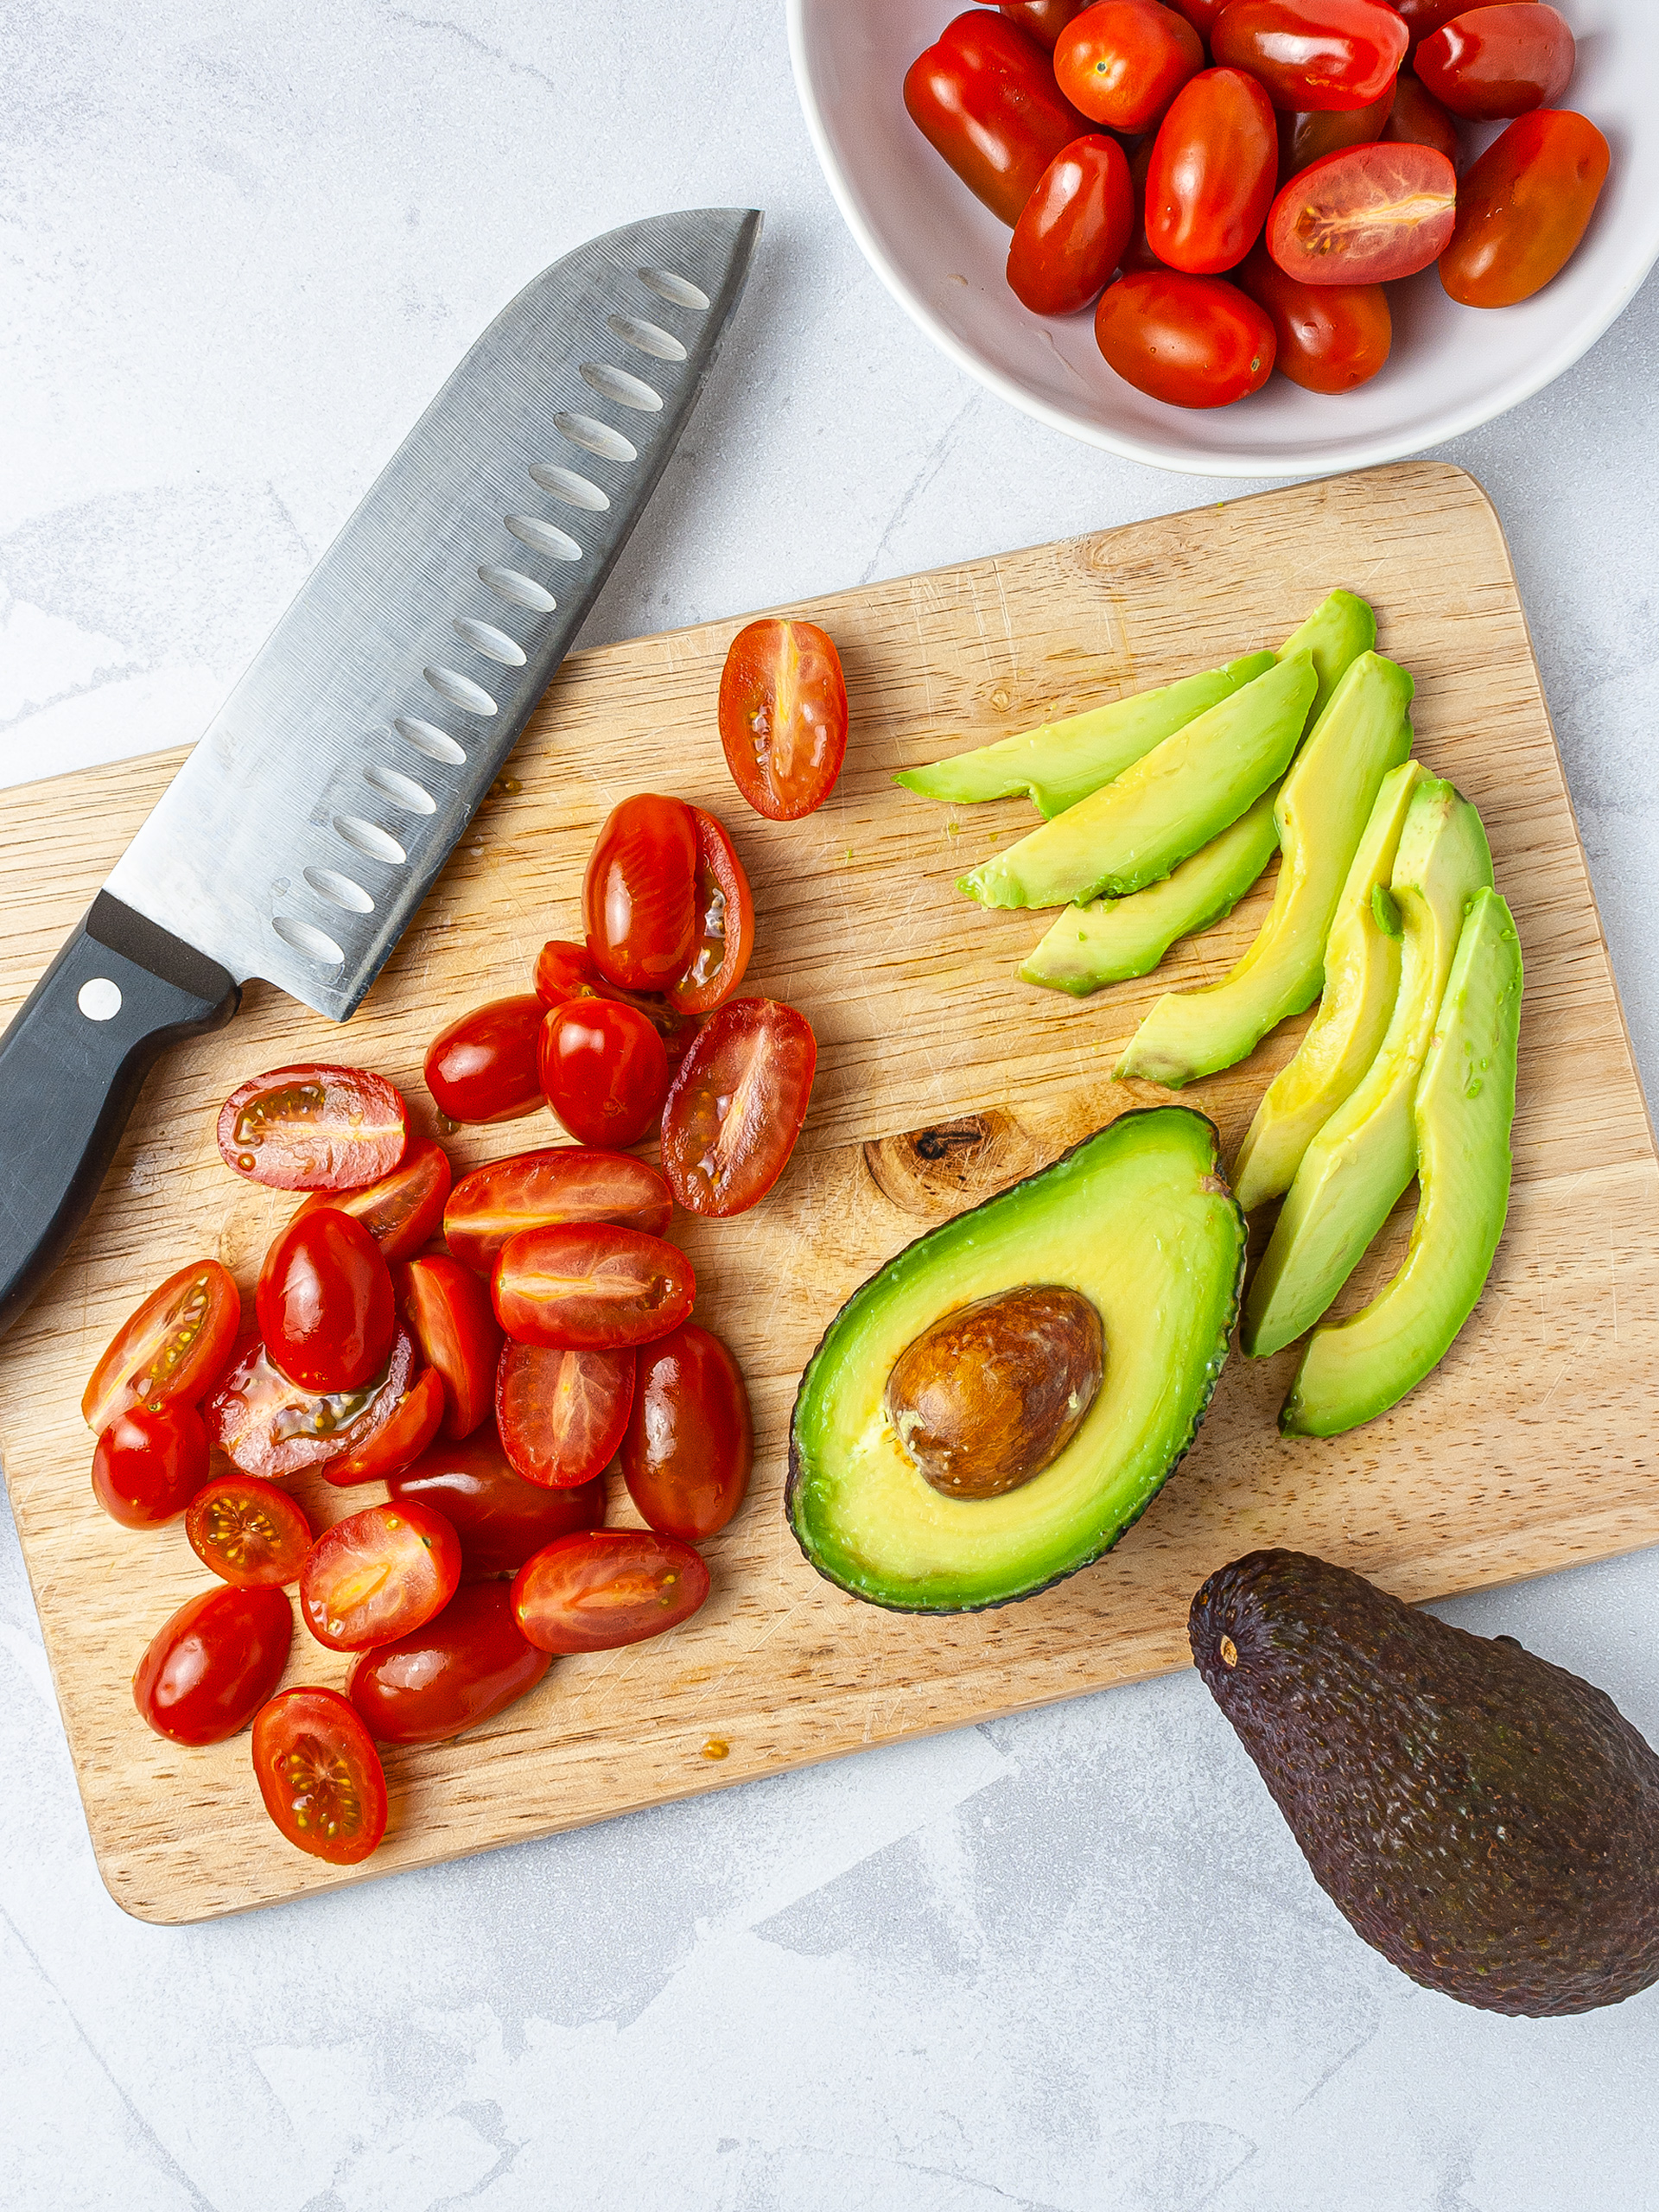 Halved tomatoes and sliced avocado on a chopping board.